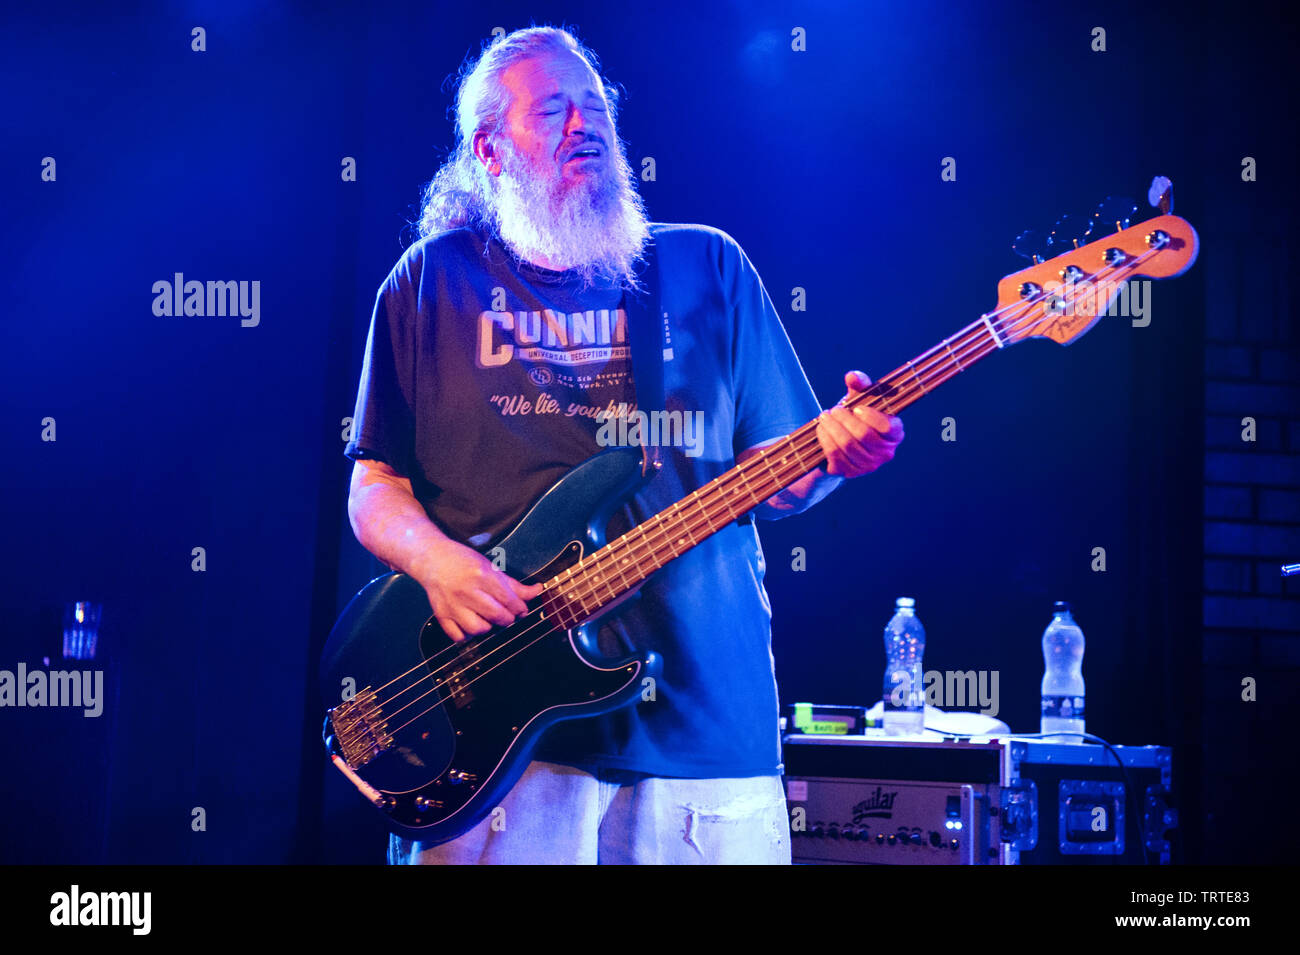 US rock band Meat Puppets in concert at the Brudenell Social Club, Leeds, 10th June 2019. Bass player Cris Kirkwood. Stock Photo